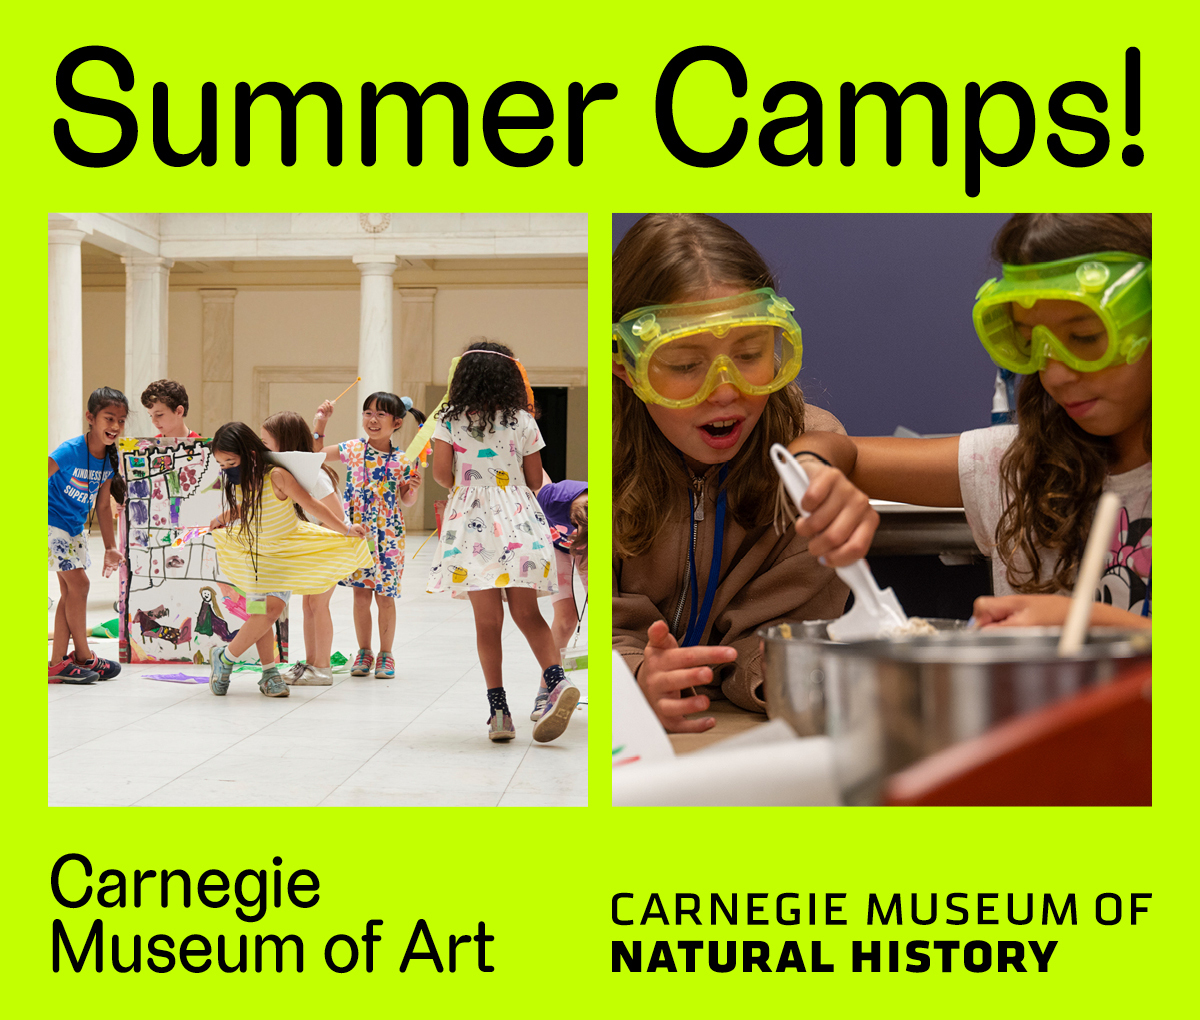 Graphic banner with photos of happy kids and text that reads “Summer Camps, Carnegie Museums of Art and Natural History with Carnegie Mellon School of Architecture.”